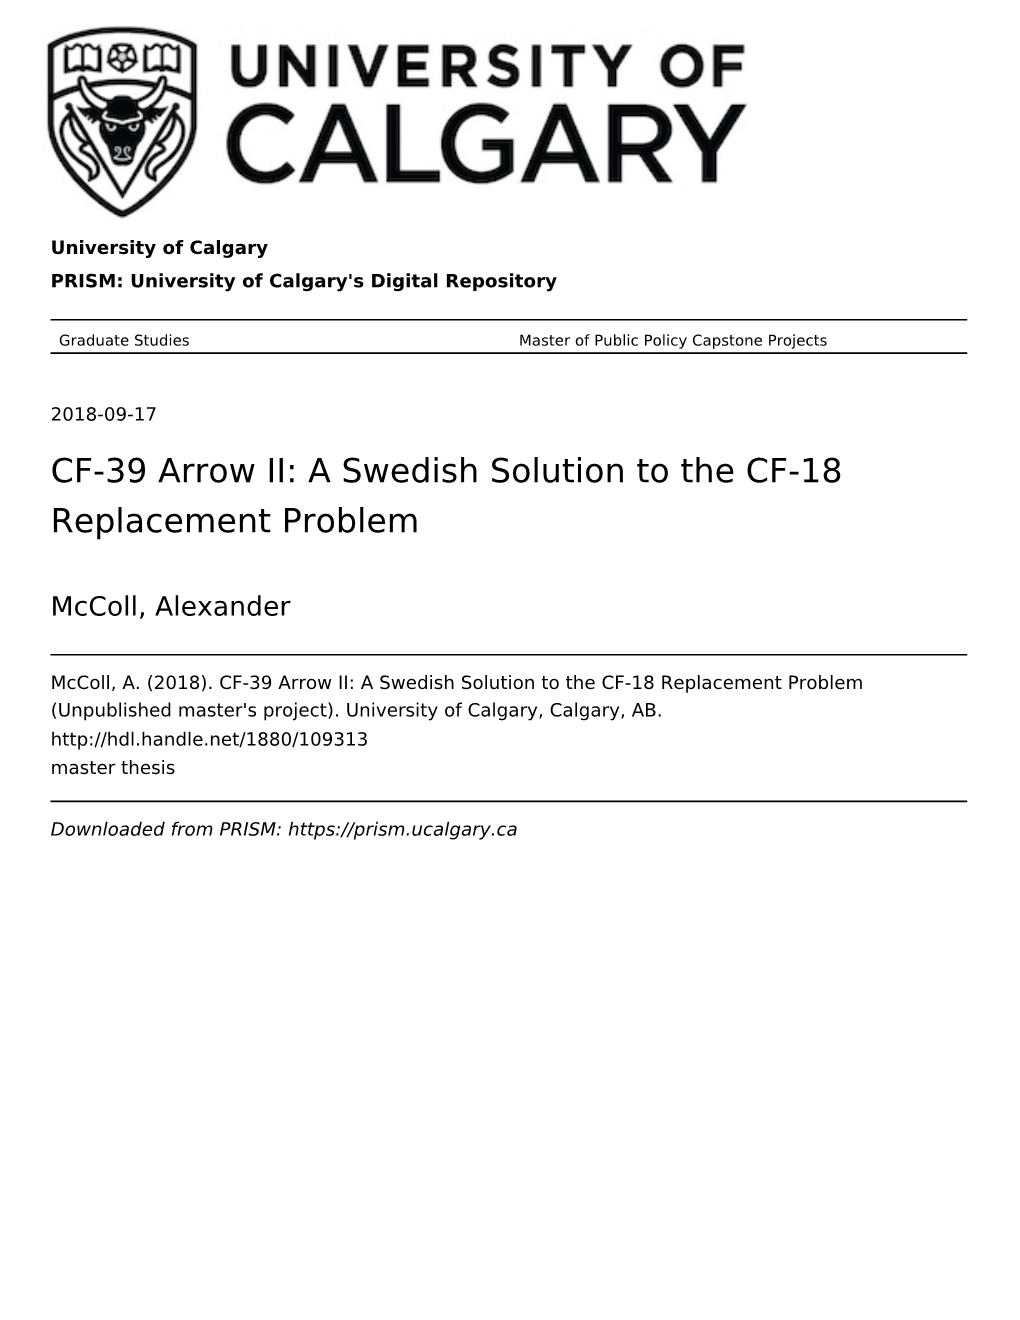 A Swedish Solution to the CF-18 Replacement Problem